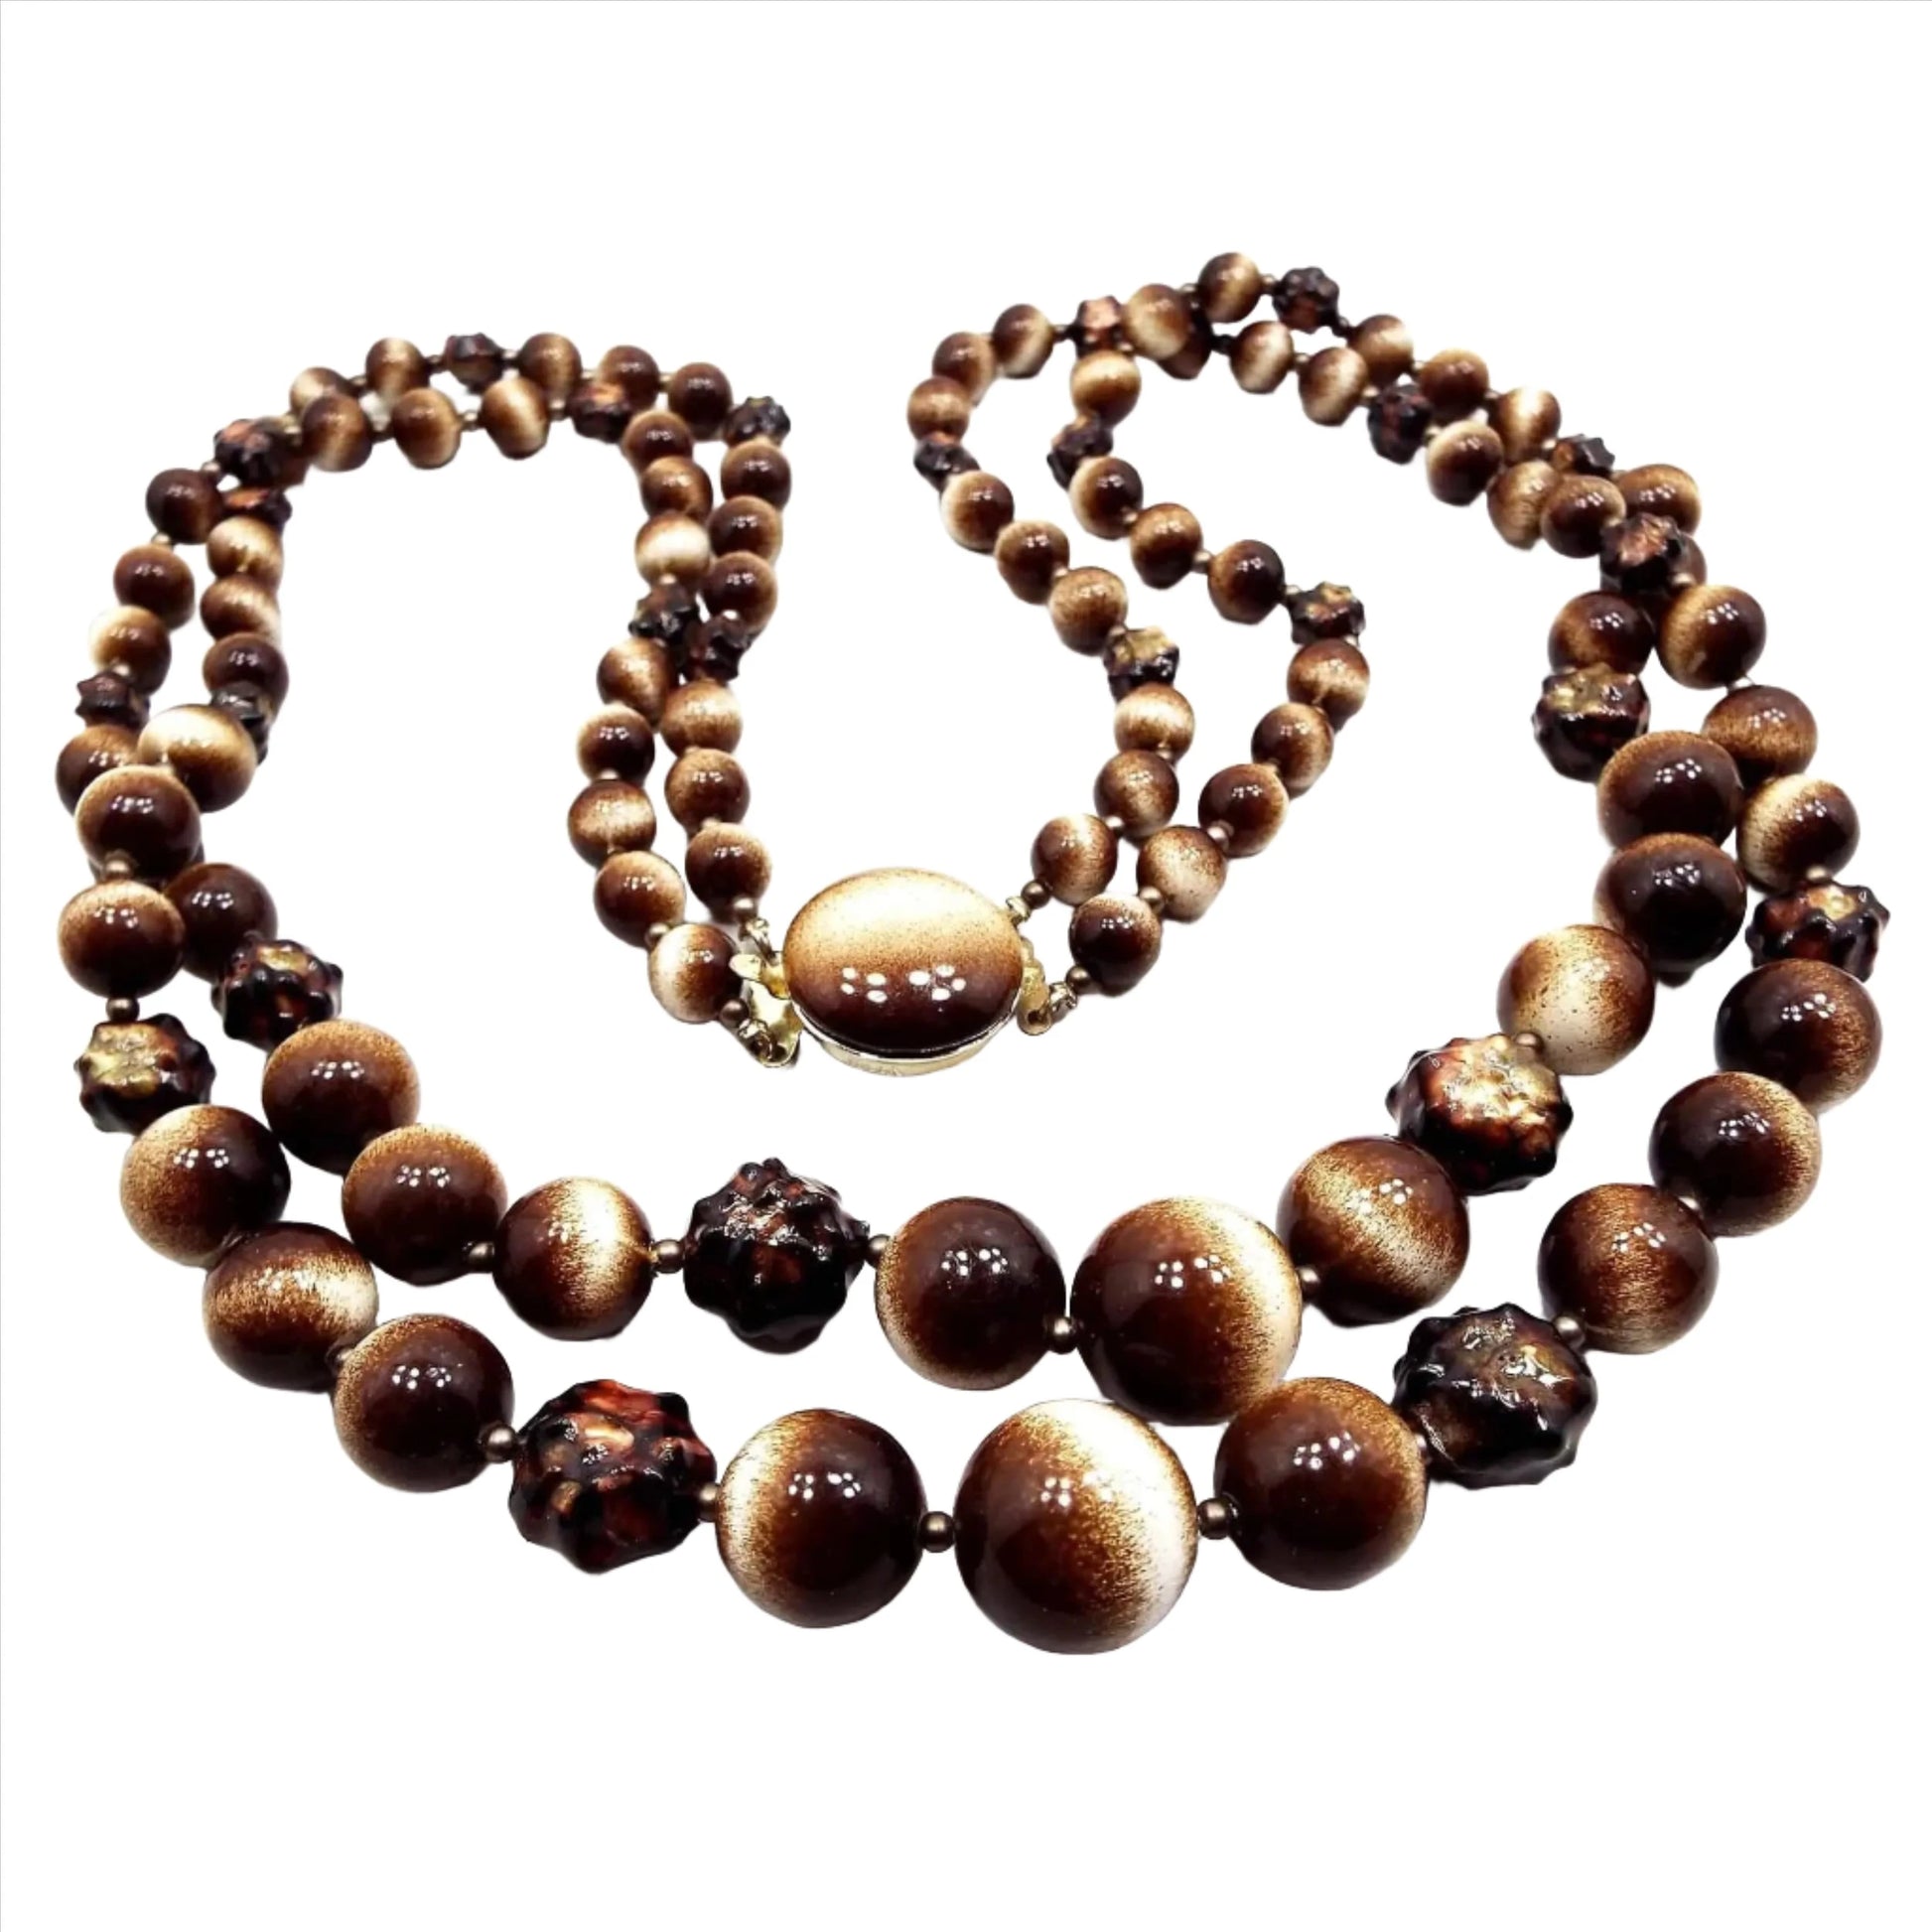 Front view of the Mid Century vintage multi strand beaded necklace from Japan. There are two strands of mostly round beads in dark brown and white. There are some dark chunky brown beads here and there throughout the necklace. At the end is a box clasp with a flat plastic top with the same dark brown and white shading.